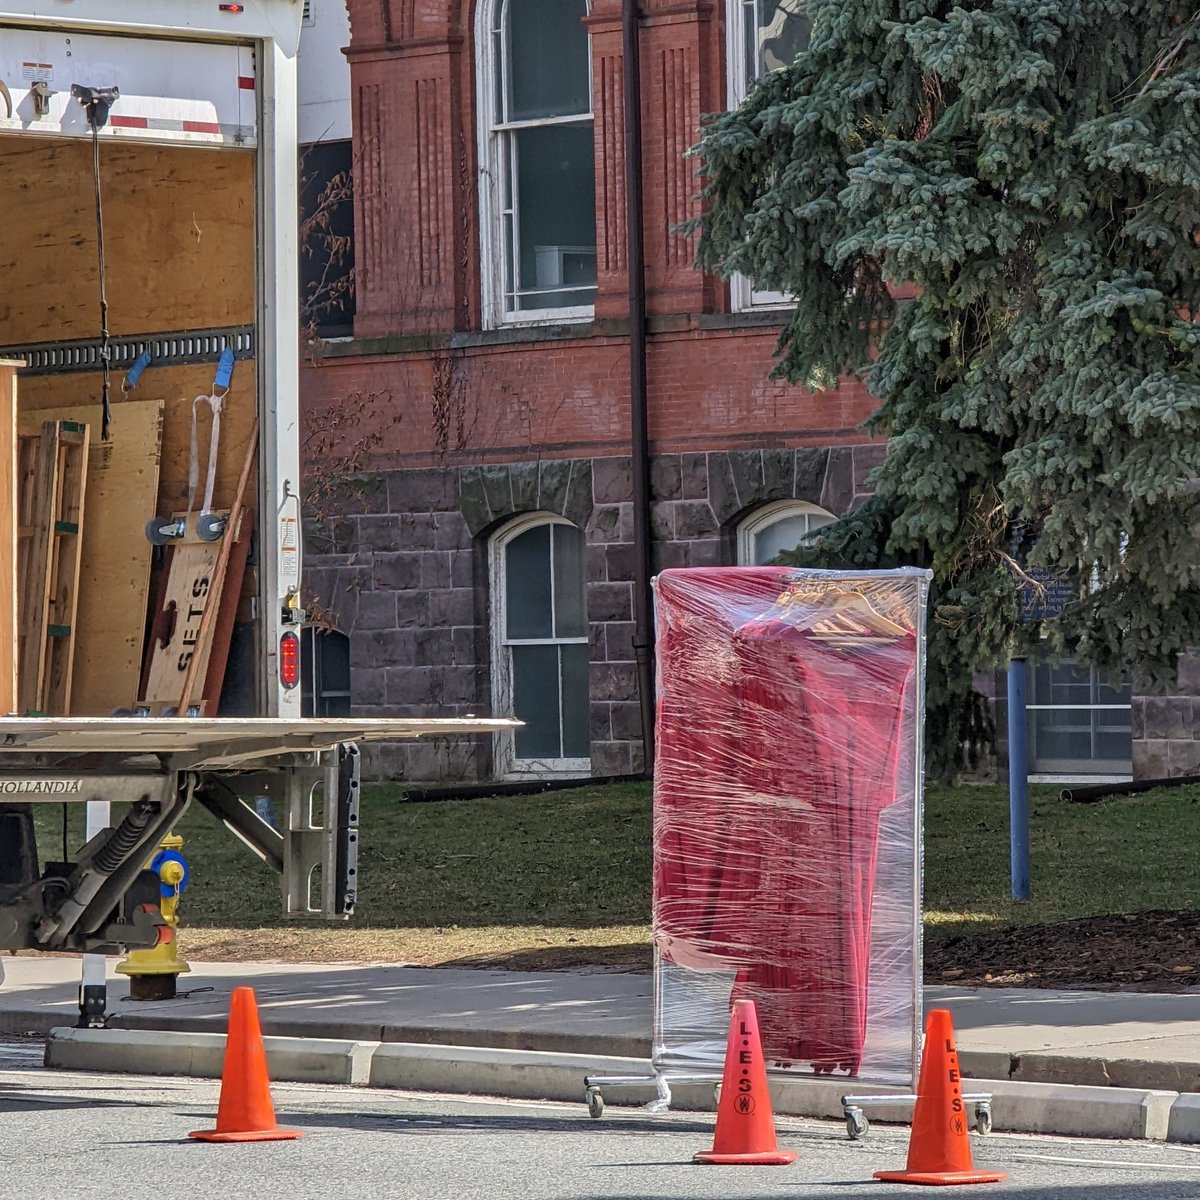 They were wrapping up the equipment at Wycliffe College this afternoon. It seems they were still shooting The Handmaid's Tale last night at the red center. #rubyroad @TOFilming_EM @ILobiral